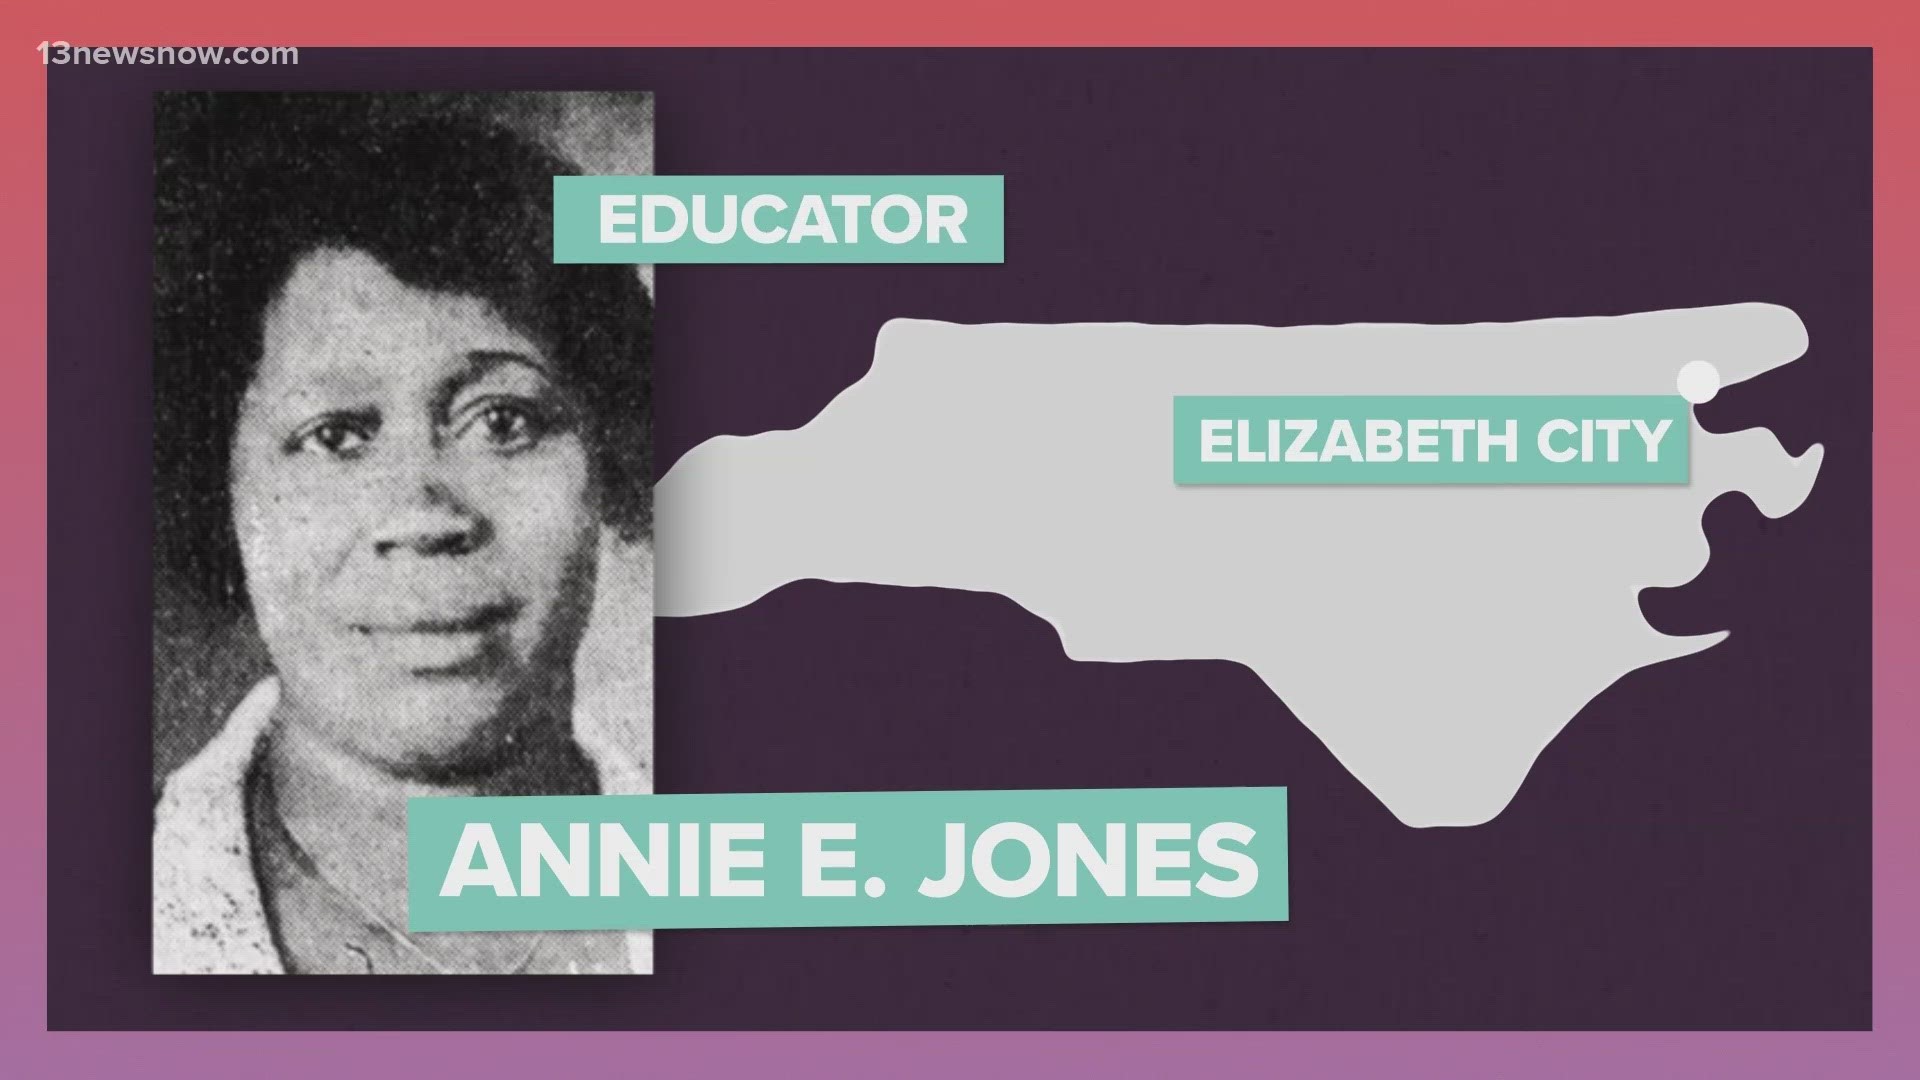 Annie E. Jones was an educator who worked to provide voting education classes to Black women, who still struggled for the right to vote after the 19th Amendment.